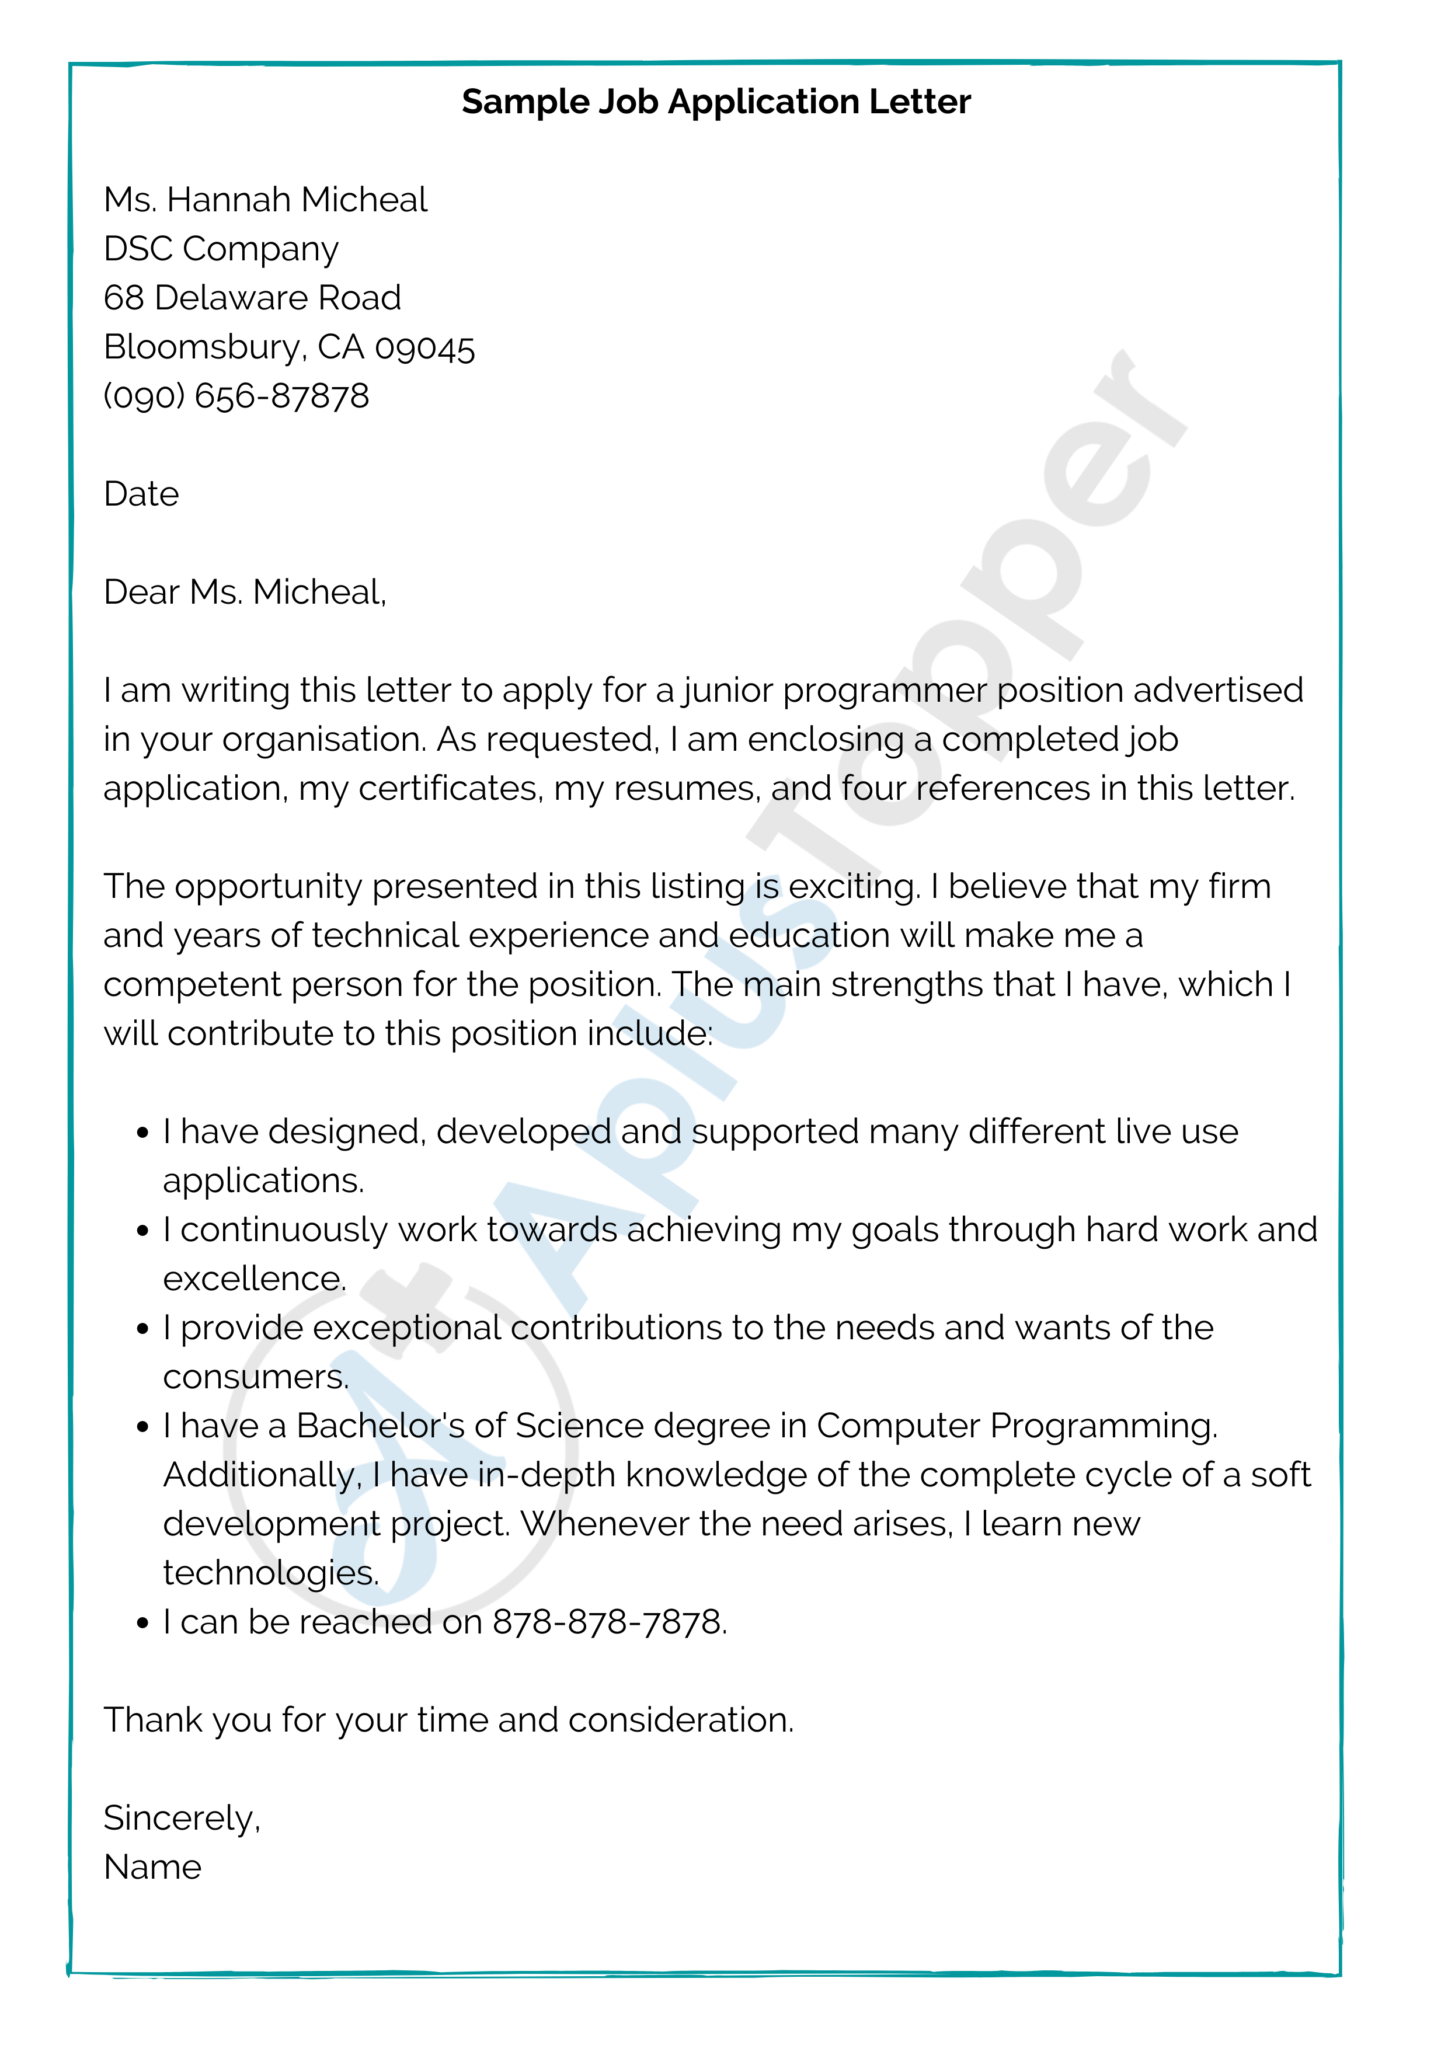 write an application letter for the job